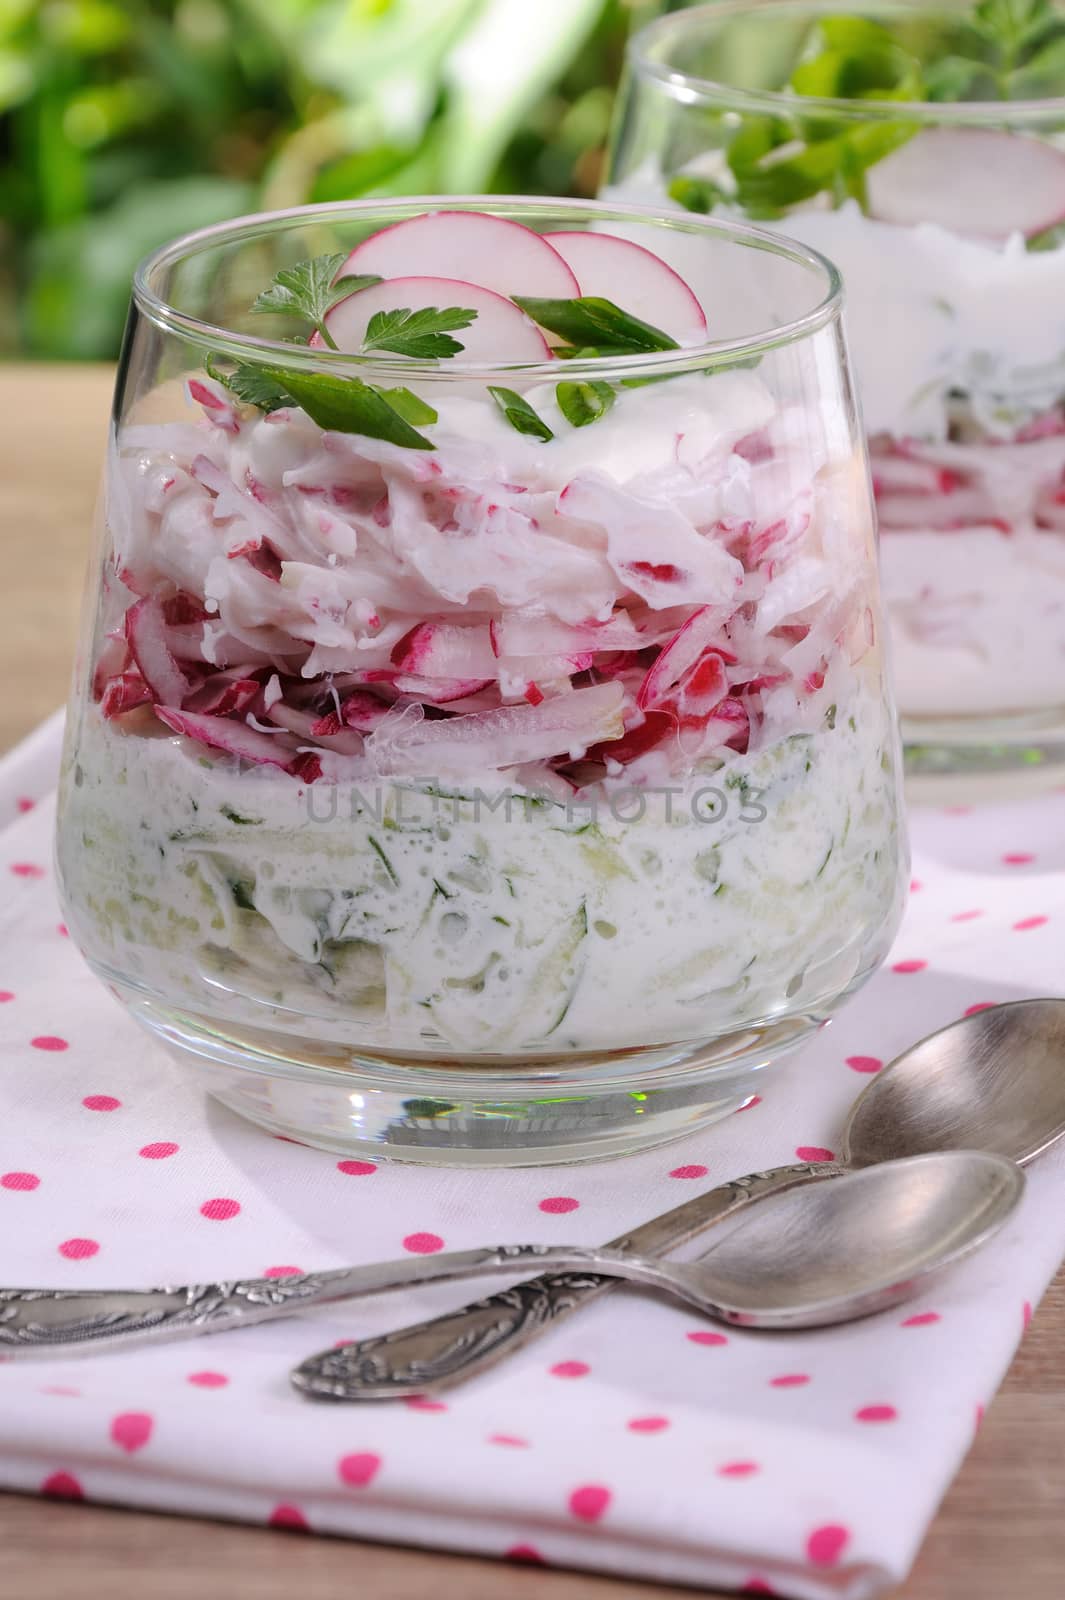 Salad of grated radish and cucumber with yogurt in a glass